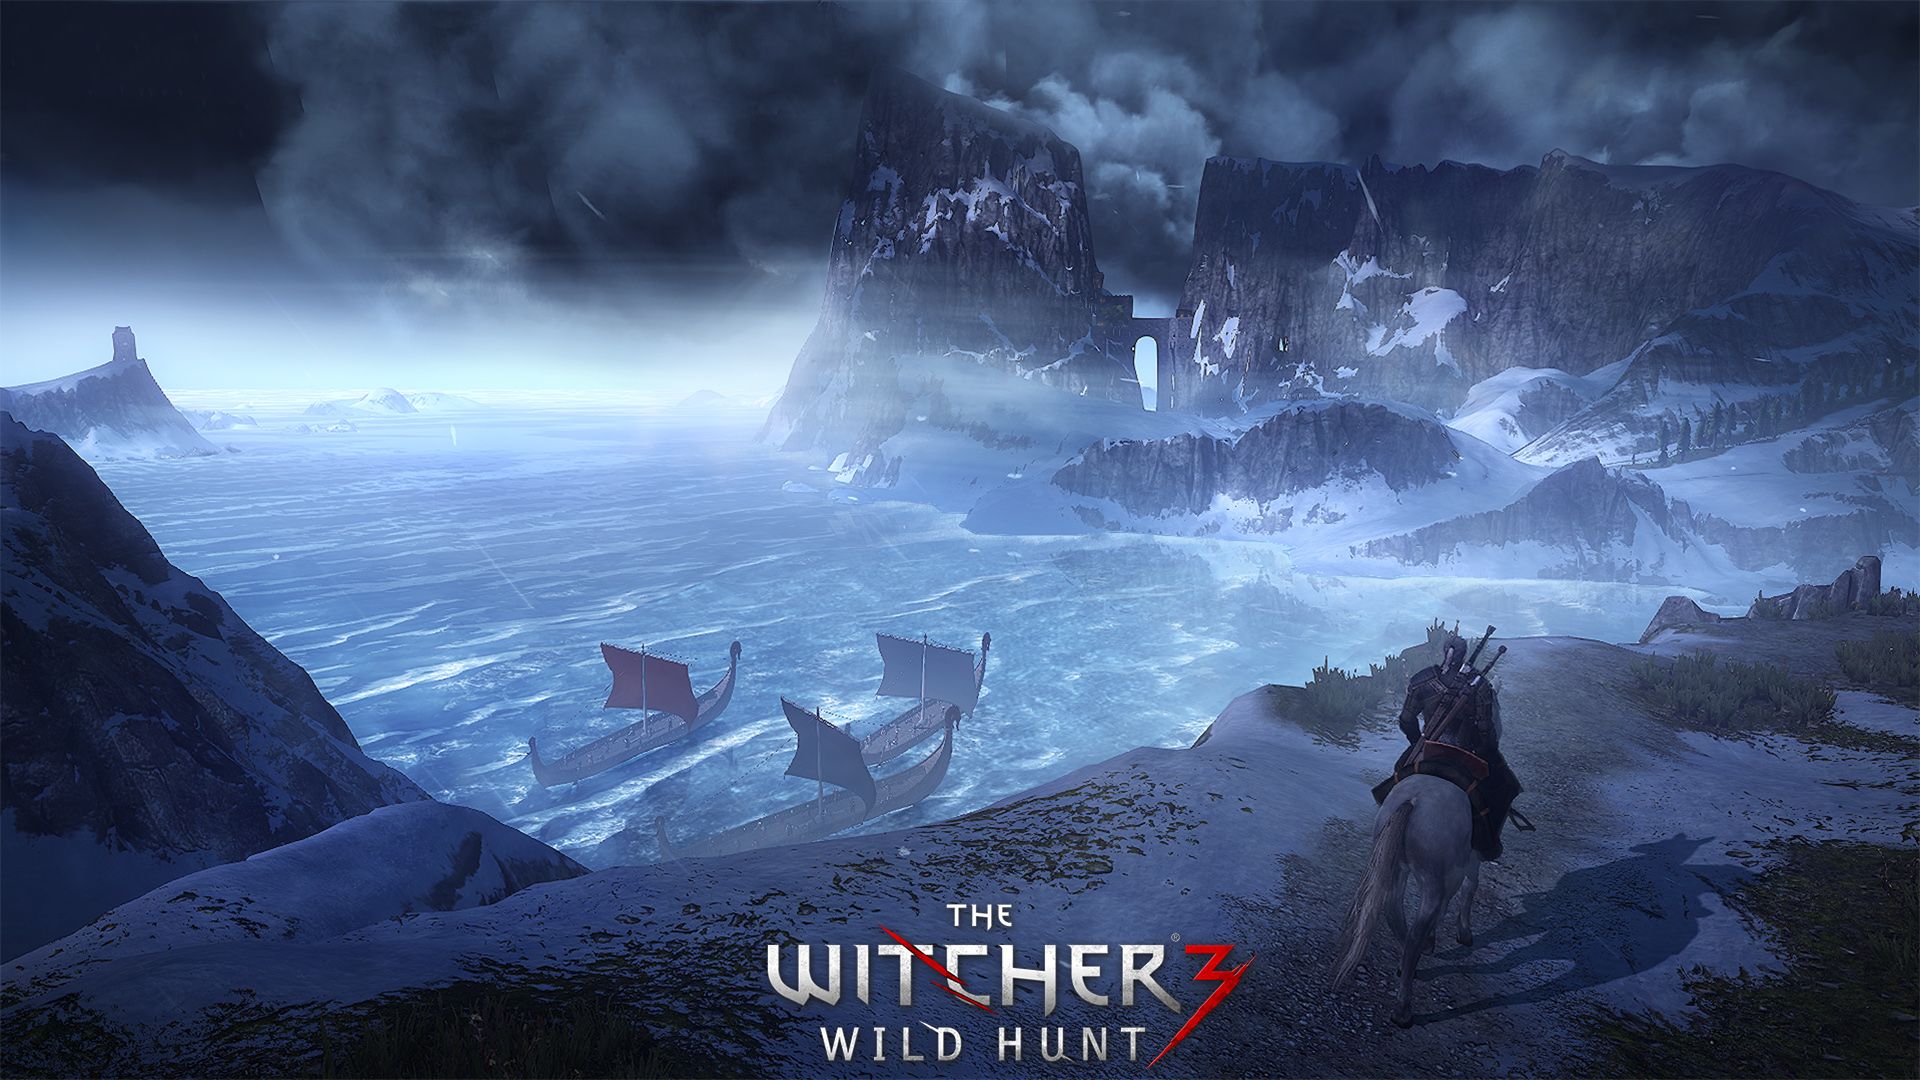 Download 1920x1080 HD Wallpaper the witcher 3 island winter aerial view, Desktop Background HD